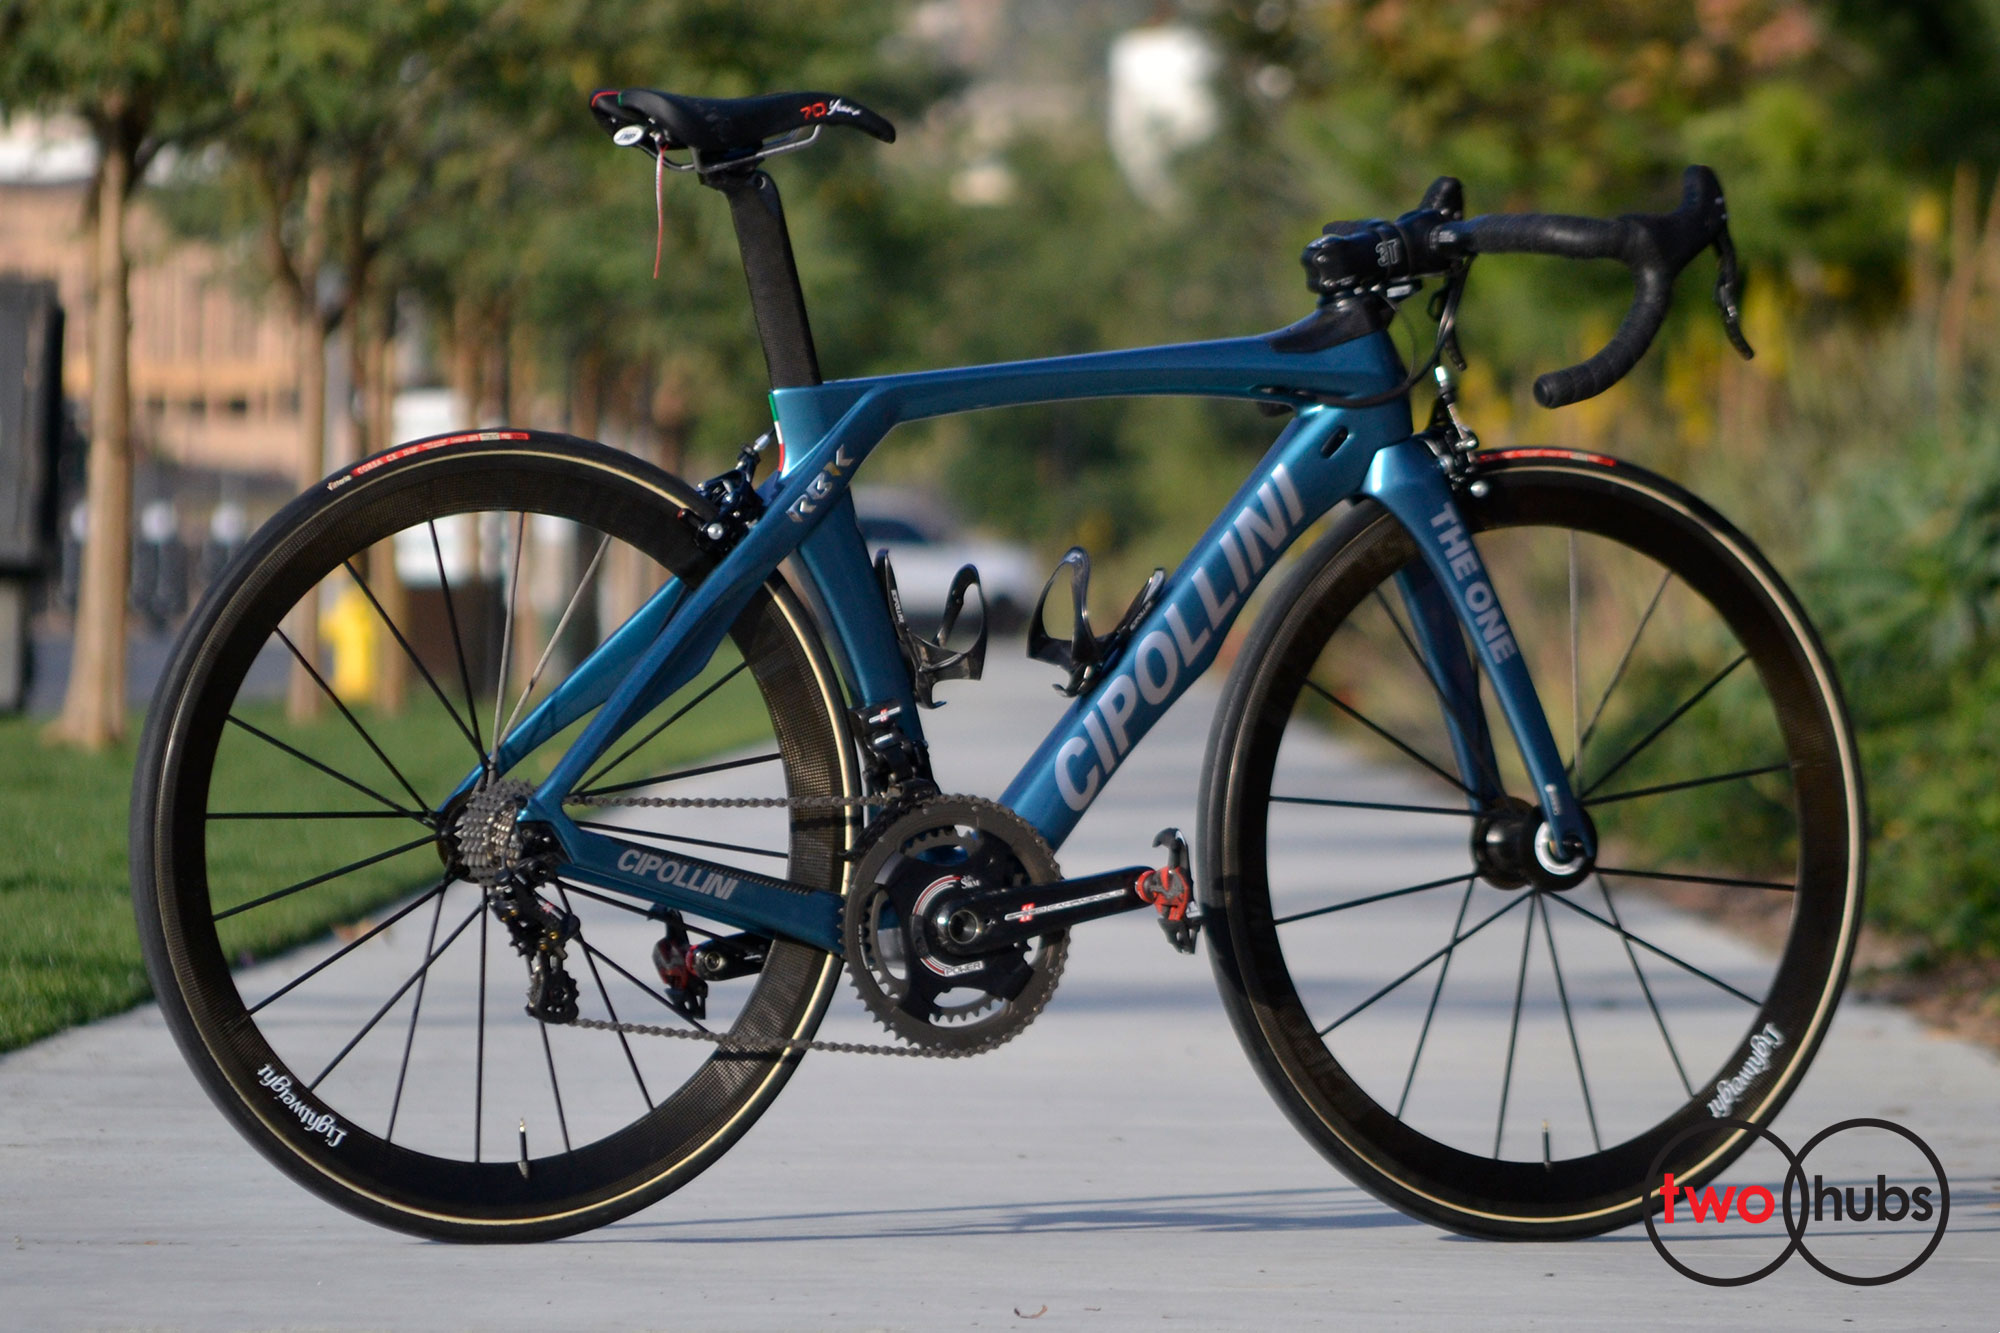 www.twohubs.com: Cipollini RB1K THE ONE Campagnolo Super Record EPS ...